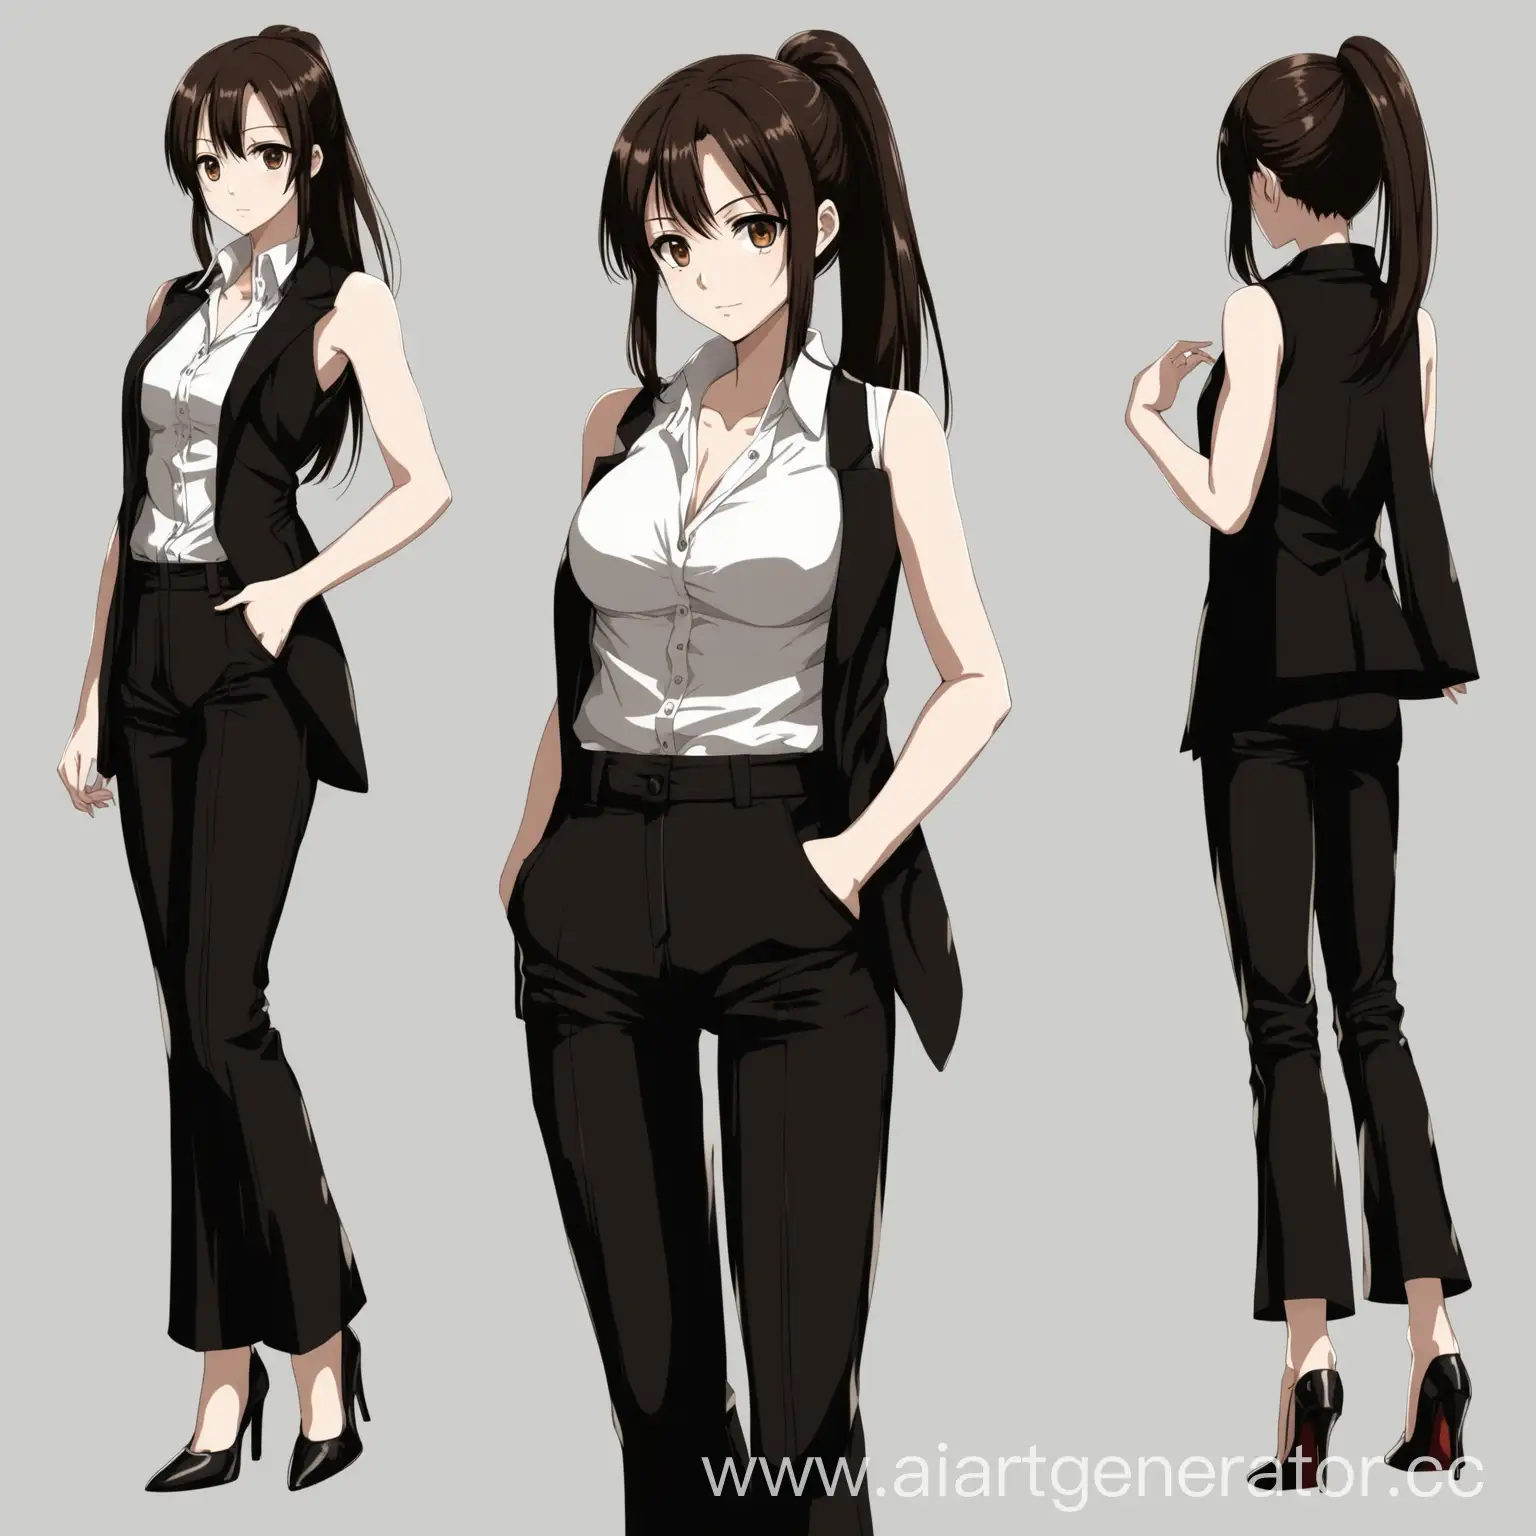 Brunette-Anime-Girl-in-Stylish-Black-and-White-Outfit-with-Ponytail